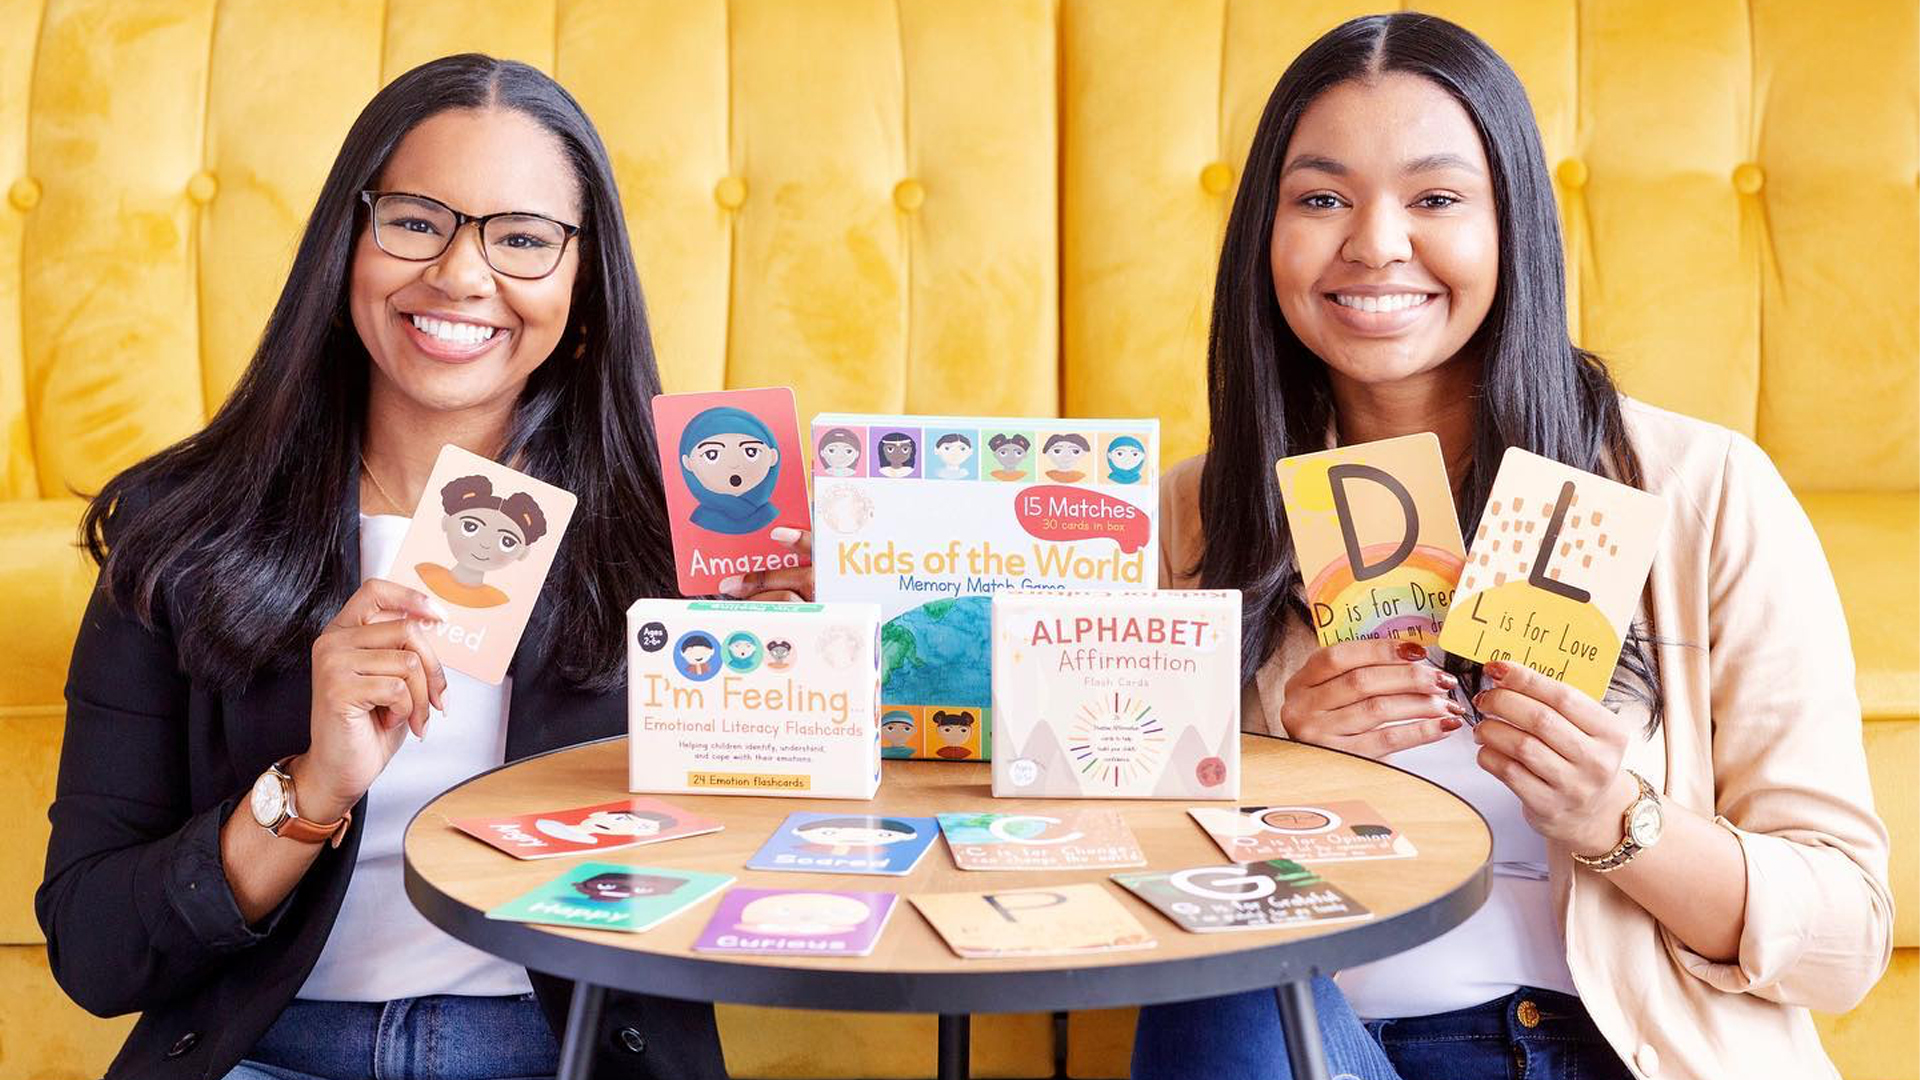 These Sisters Created A Diverse Children's Brand That Will Now Be Sold At Walmart